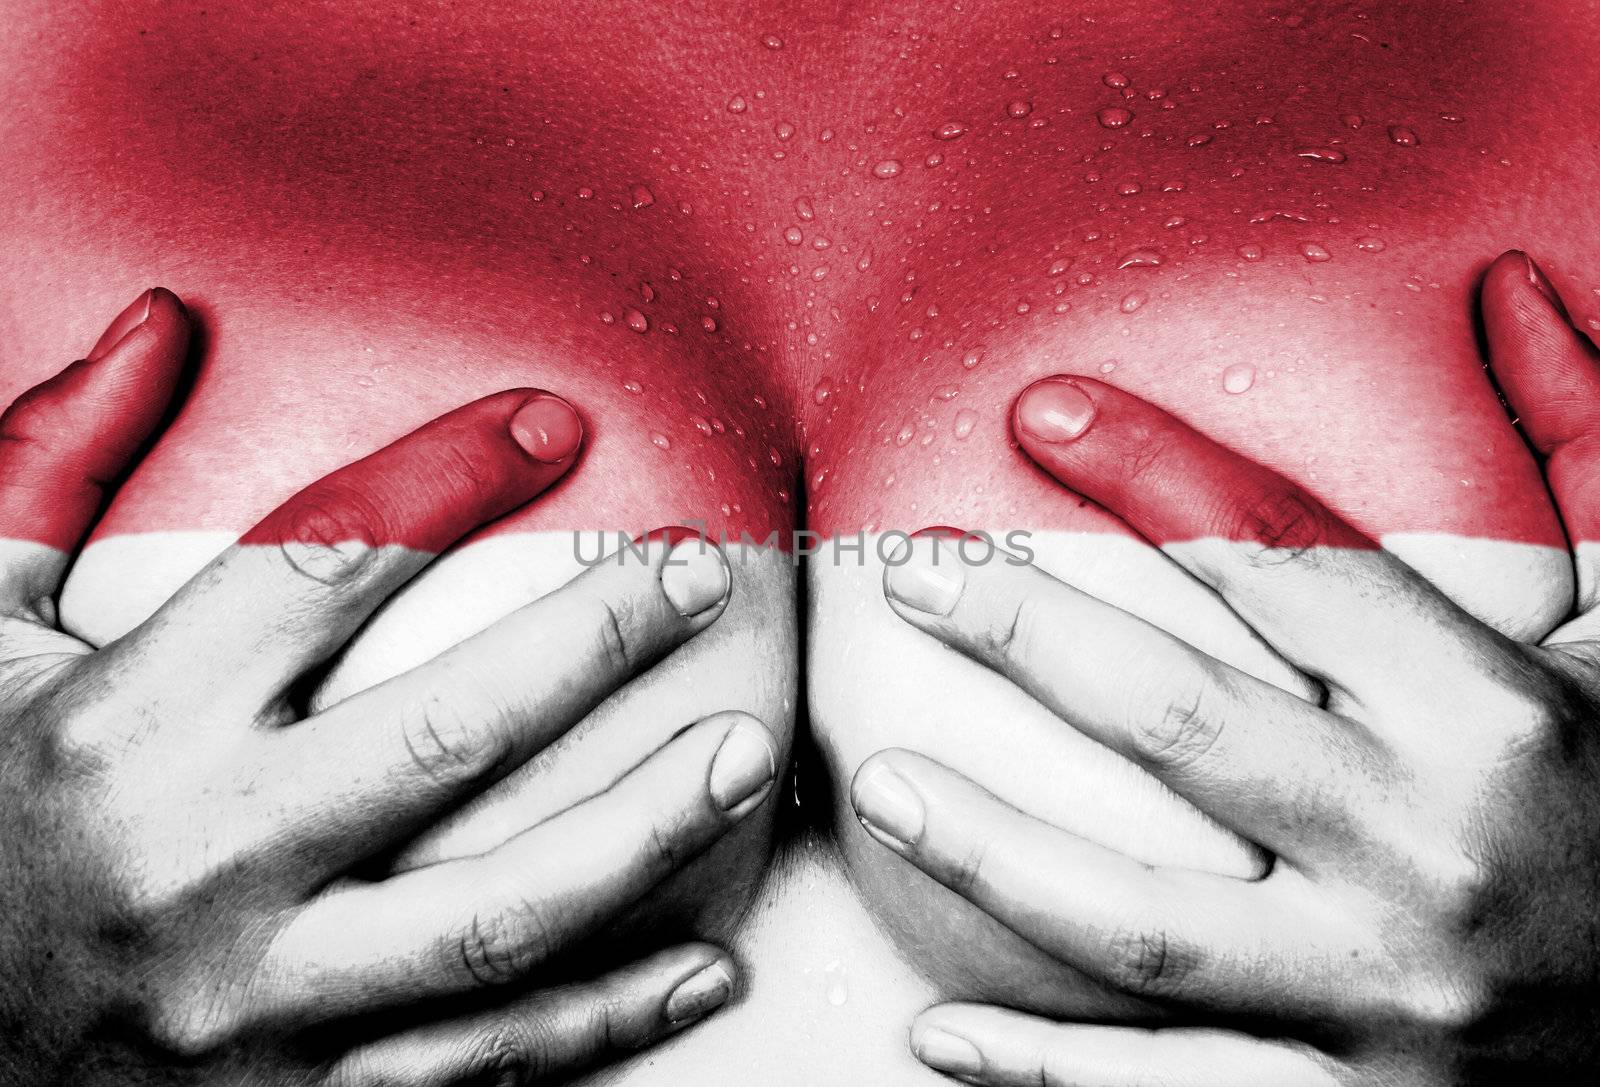 Sweaty upper part of female body, hands covering breasts, flag of Indonesia